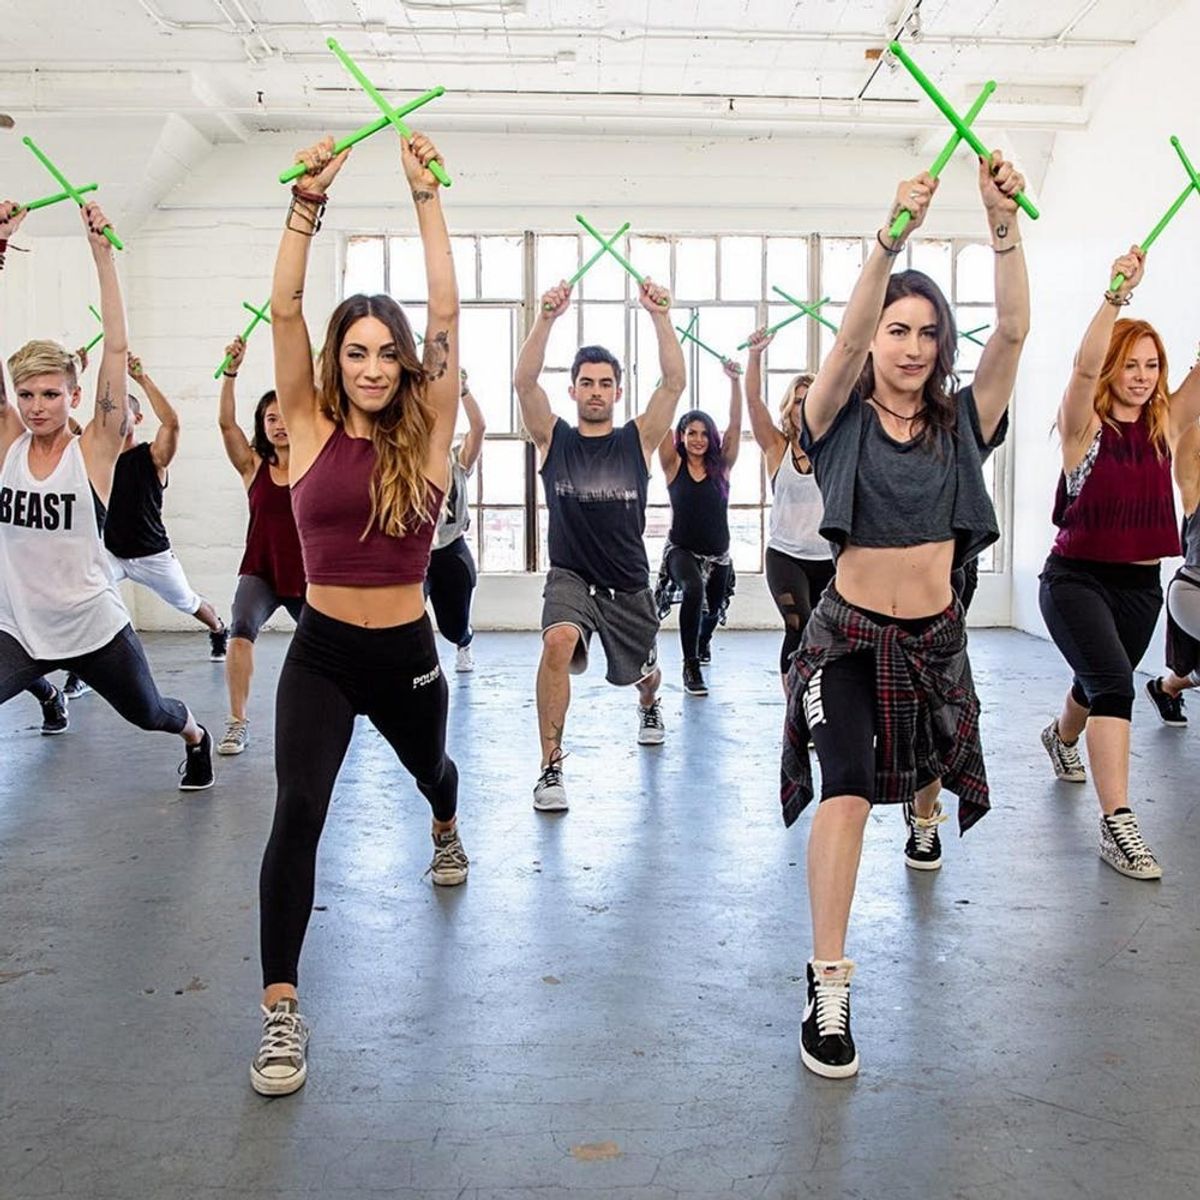 This Drumming-Inspired Workout Class Is About to Be Cooler Than SoulCycle